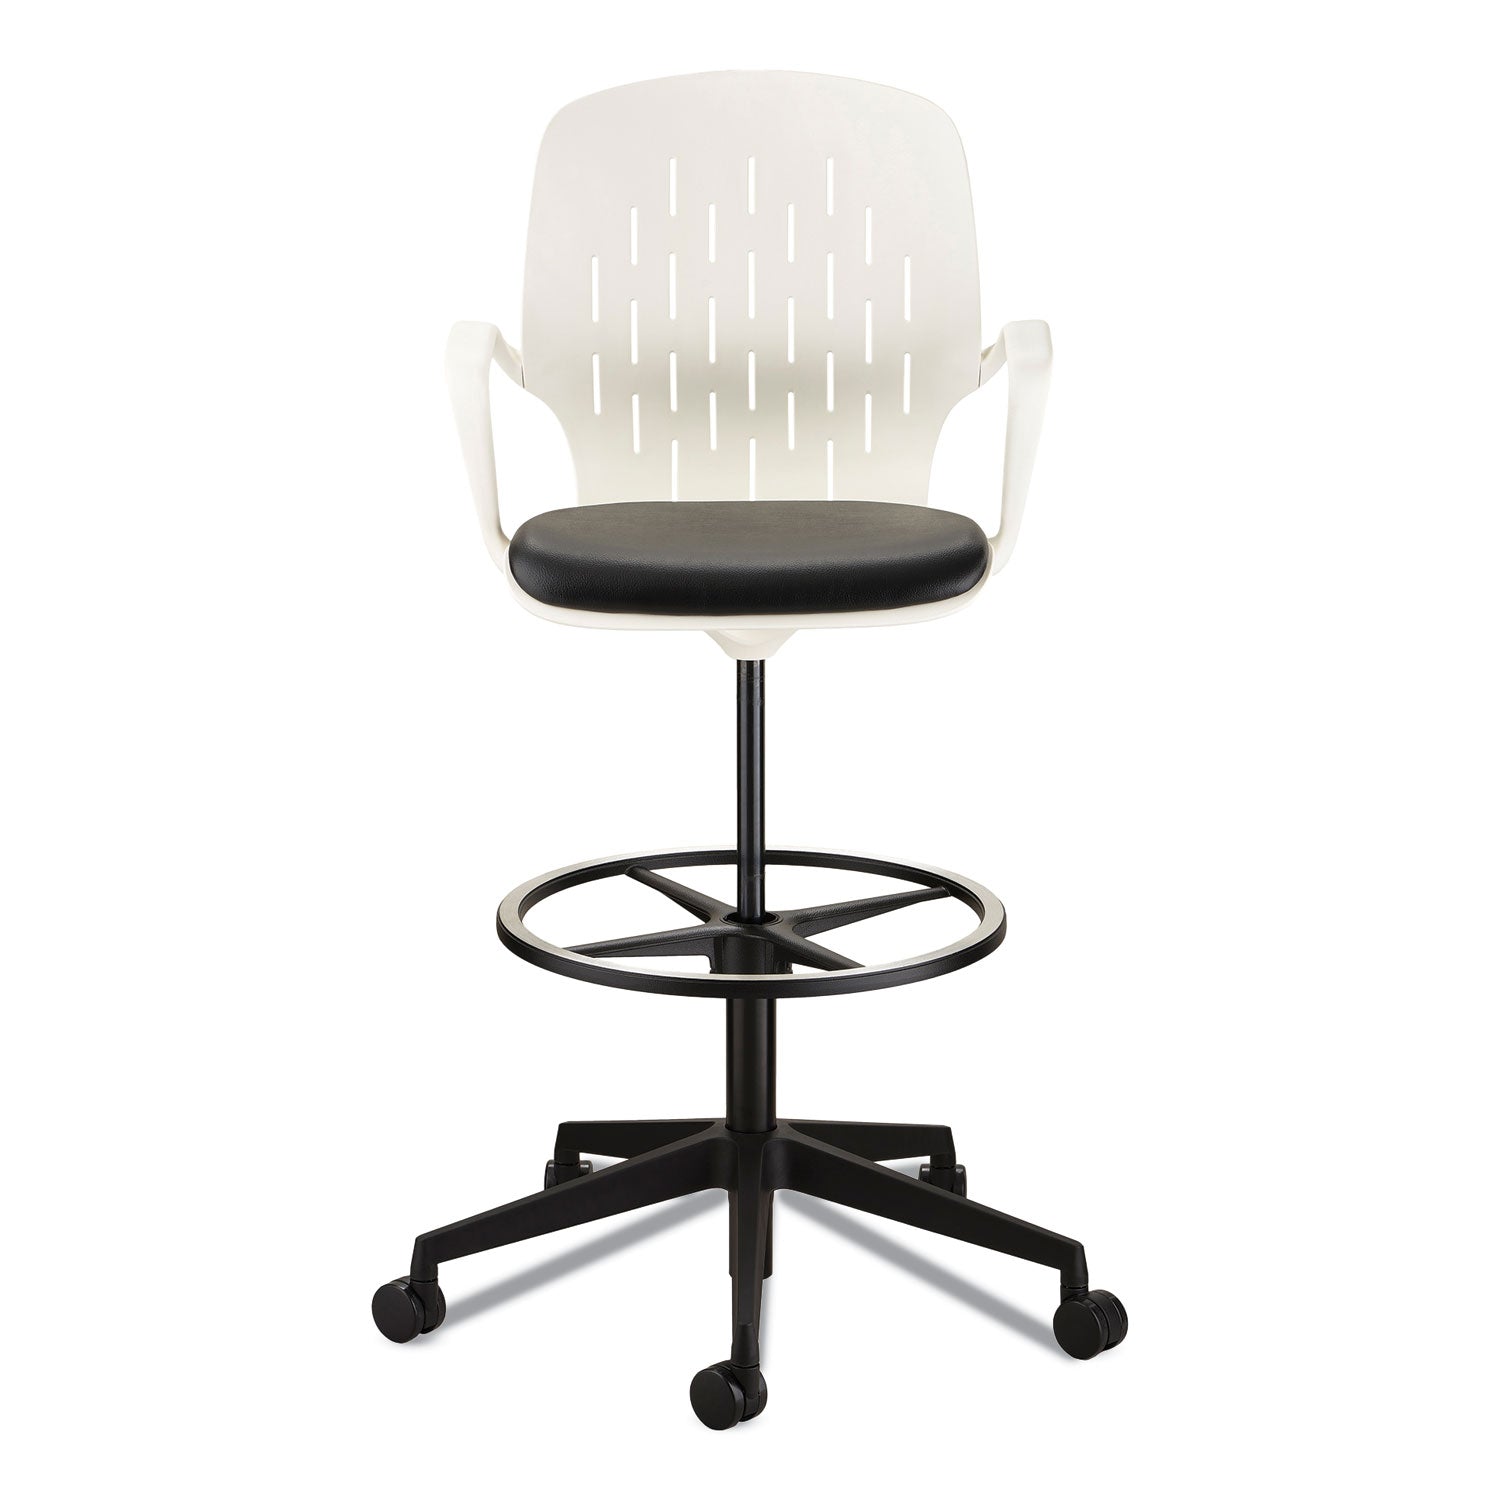 shell-extended-height-chair-max-275-lb-22-to-32-high-black-white-seat-white-back-black-base-ships-in-1-3-business-days_saf7014wh - 2